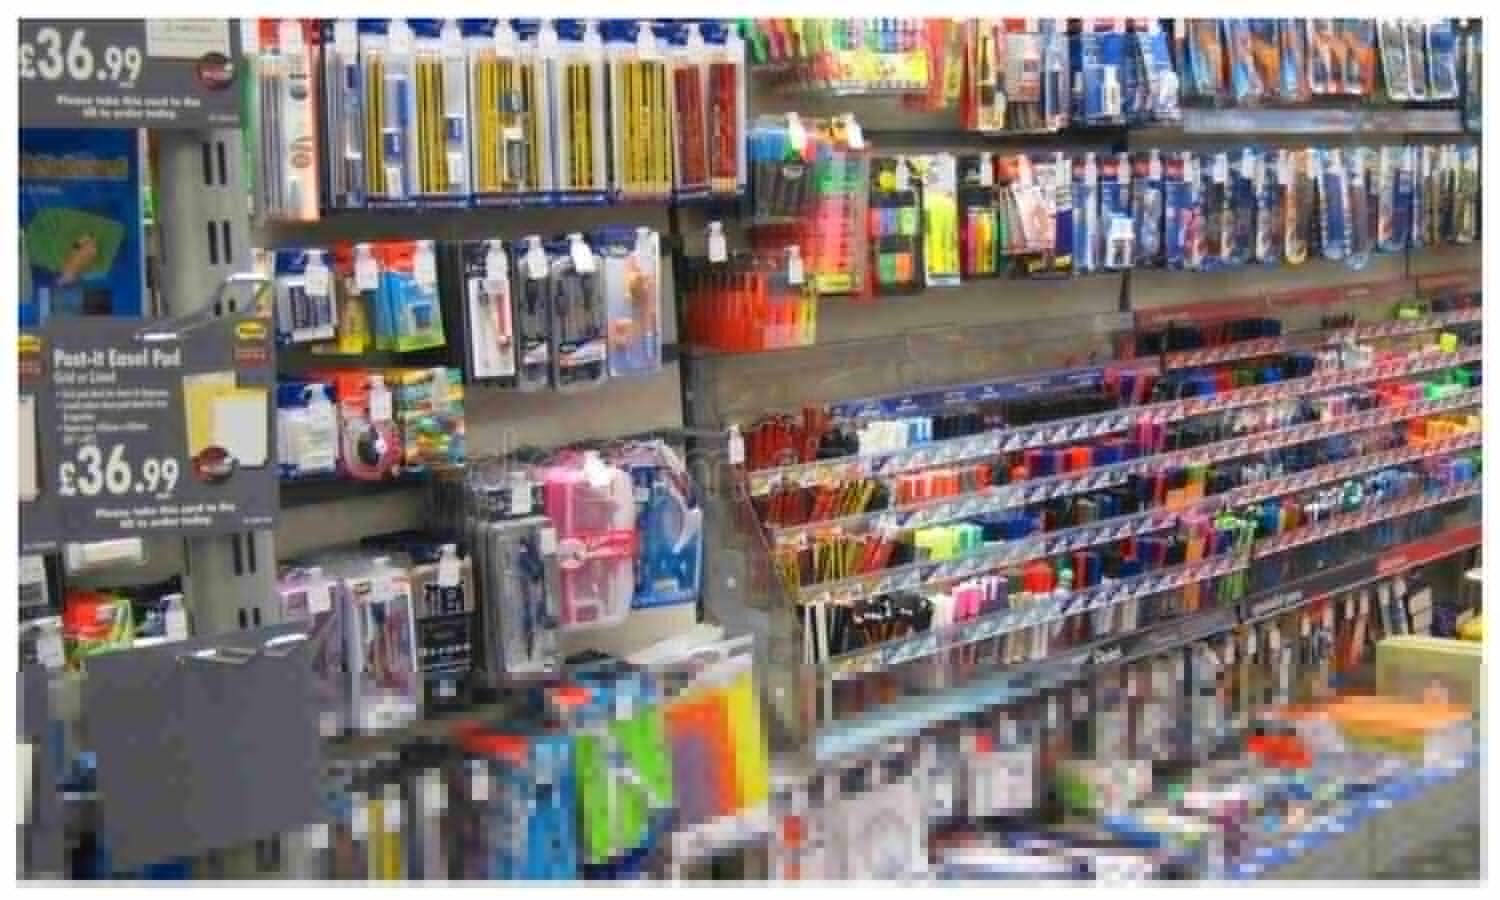 Stationery Business: School colleges have more demand for this business, cost less profit bumper